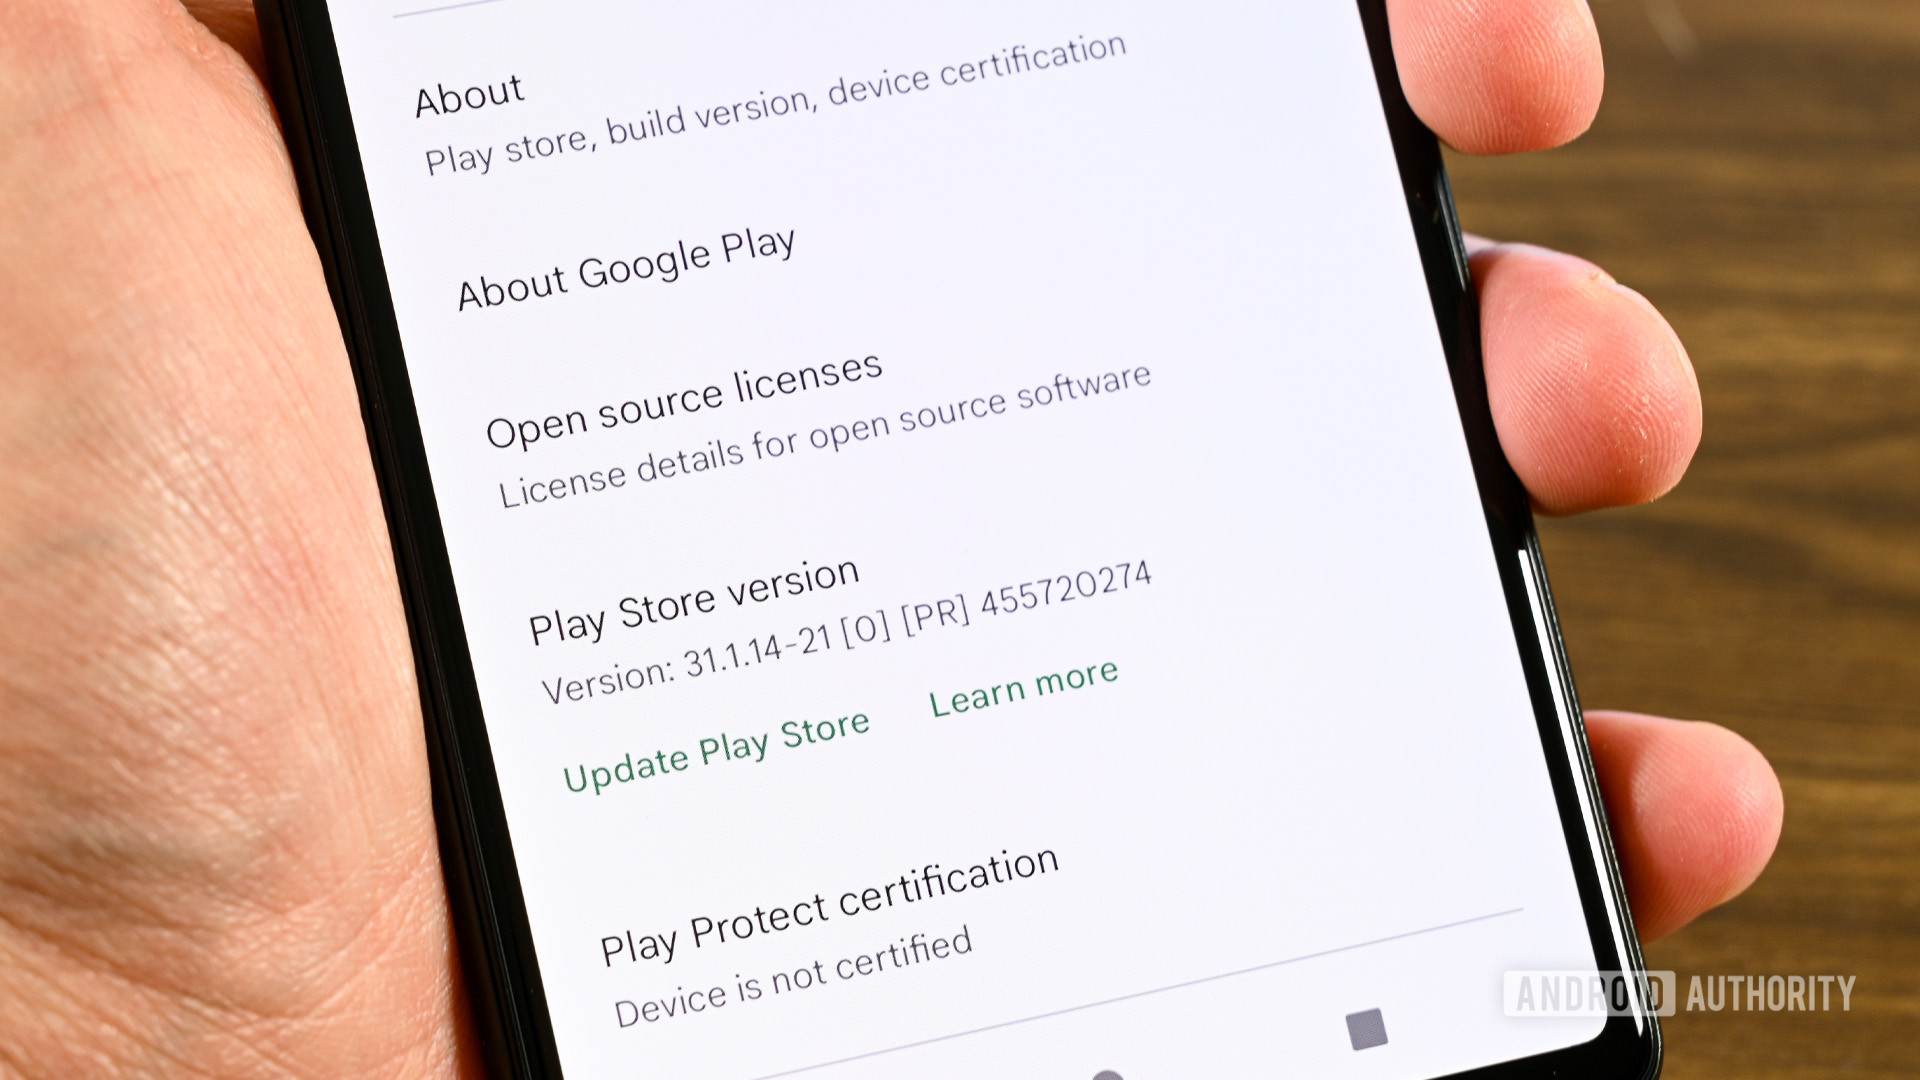 Google Play Store Other Settings